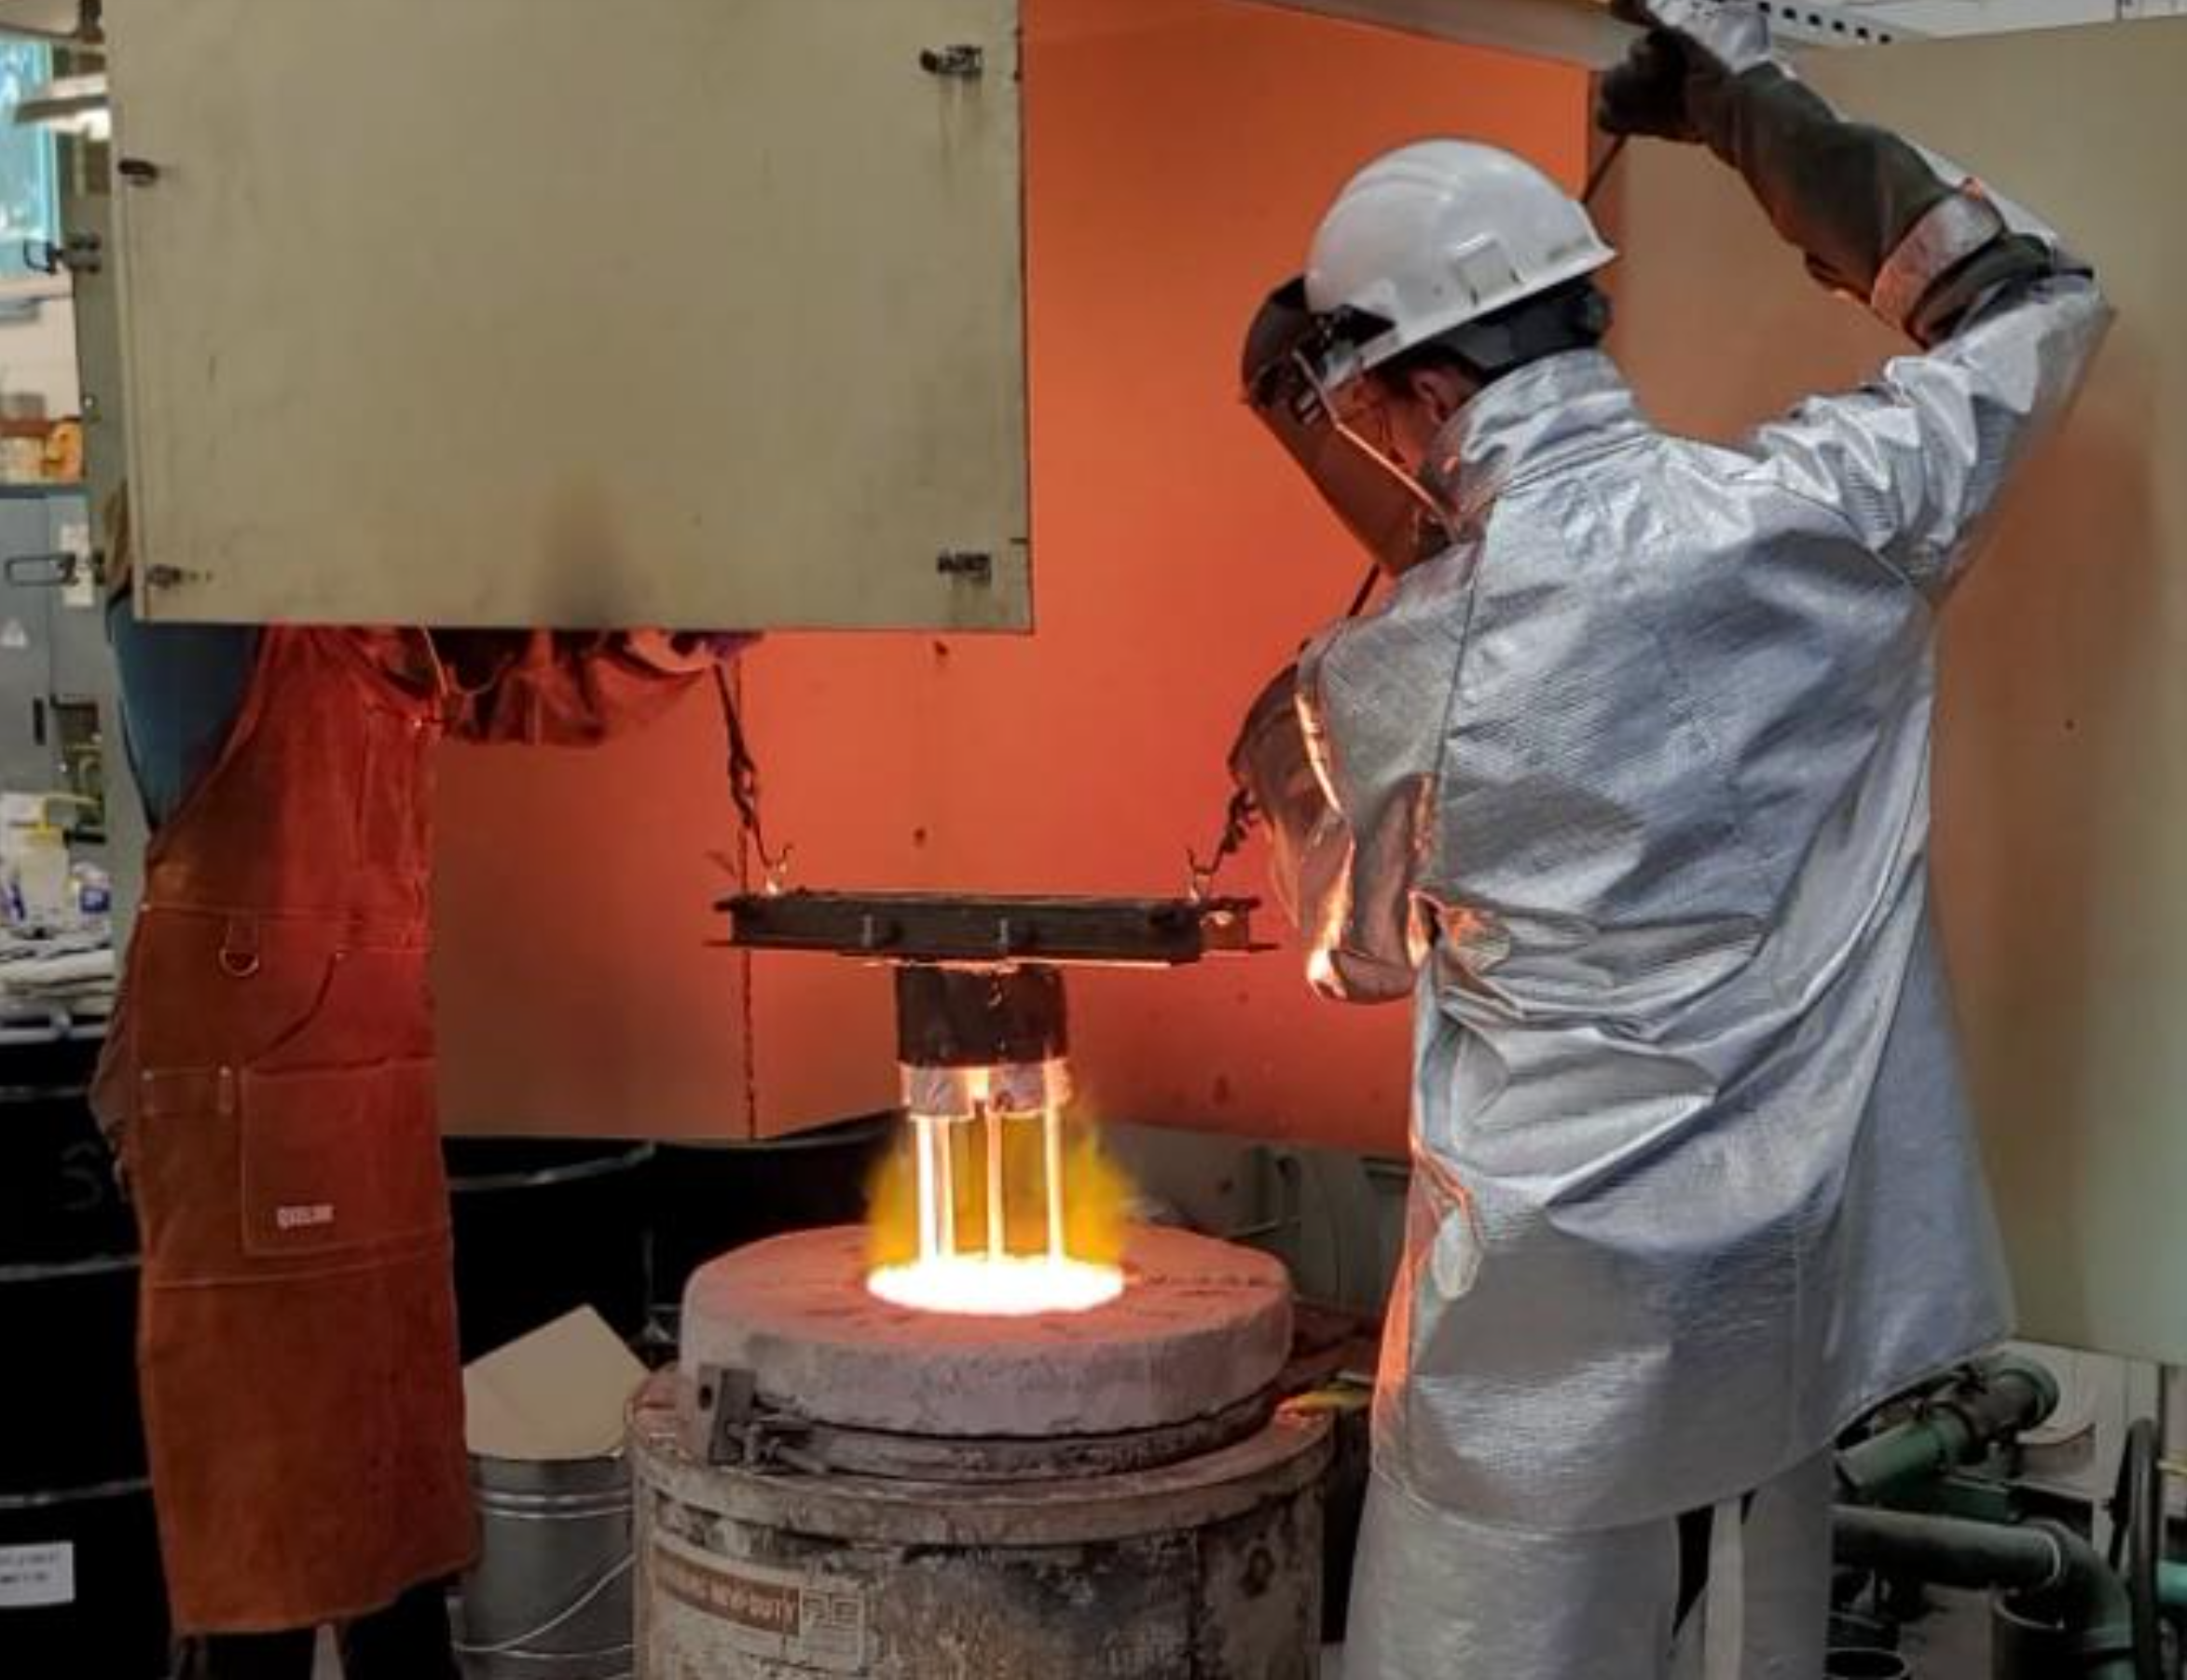 Colorado School of Mines team members are shown submerging the housing into a furnace holding simulated regolith melt > 1,300°C in the 2023 BIG Idea Challenge.» decoding=»async» block_context=»nasa-block» srcset=»https://www.nasa.gov/wp-content/uploads/2023/11/submerging-housing.png 2346w, https://www.nasa.gov/wp-content/uploads/2023/11/submerging-housing.png?resize=300,230 300w, https://www.nasa.gov/wp-content/uploads/2023/11/submerging-housing.png?resize=768,590 768w, https://www.nasa.gov/wp-content/uploads/2023/11/submerging-housing.png?resize=1024,787 1024w, https://www.nasa.gov/wp-content/uploads/2023/11/submerging-housing.png?resize=1536,1180 1536w, https://www.nasa.gov/wp-content/uploads/2023/11/submerging-housing.png?resize=2048,1573 2048w, https://www.nasa.gov/wp-content/uploads/2023/11/submerging-housing.png?resize=400,307 400w, https://www.nasa.gov/wp-content/uploads/2023/11/submerging-housing.png?resize=600,461 600w, https://www.nasa.gov/wp-content/uploads/2023/11/submerging-housing.png?resize=900,691 900w, https://www.nasa.gov/wp-content/uploads/2023/11/submerging-housing.png?resize=1200,922 1200w, https://www.nasa.gov/wp-content/uploads/2023/11/submerging-housing.png?resize=2000,1536 2000w» sizes=»(max-width: 640px) 100vw, 640px»></figure><figcaption class=